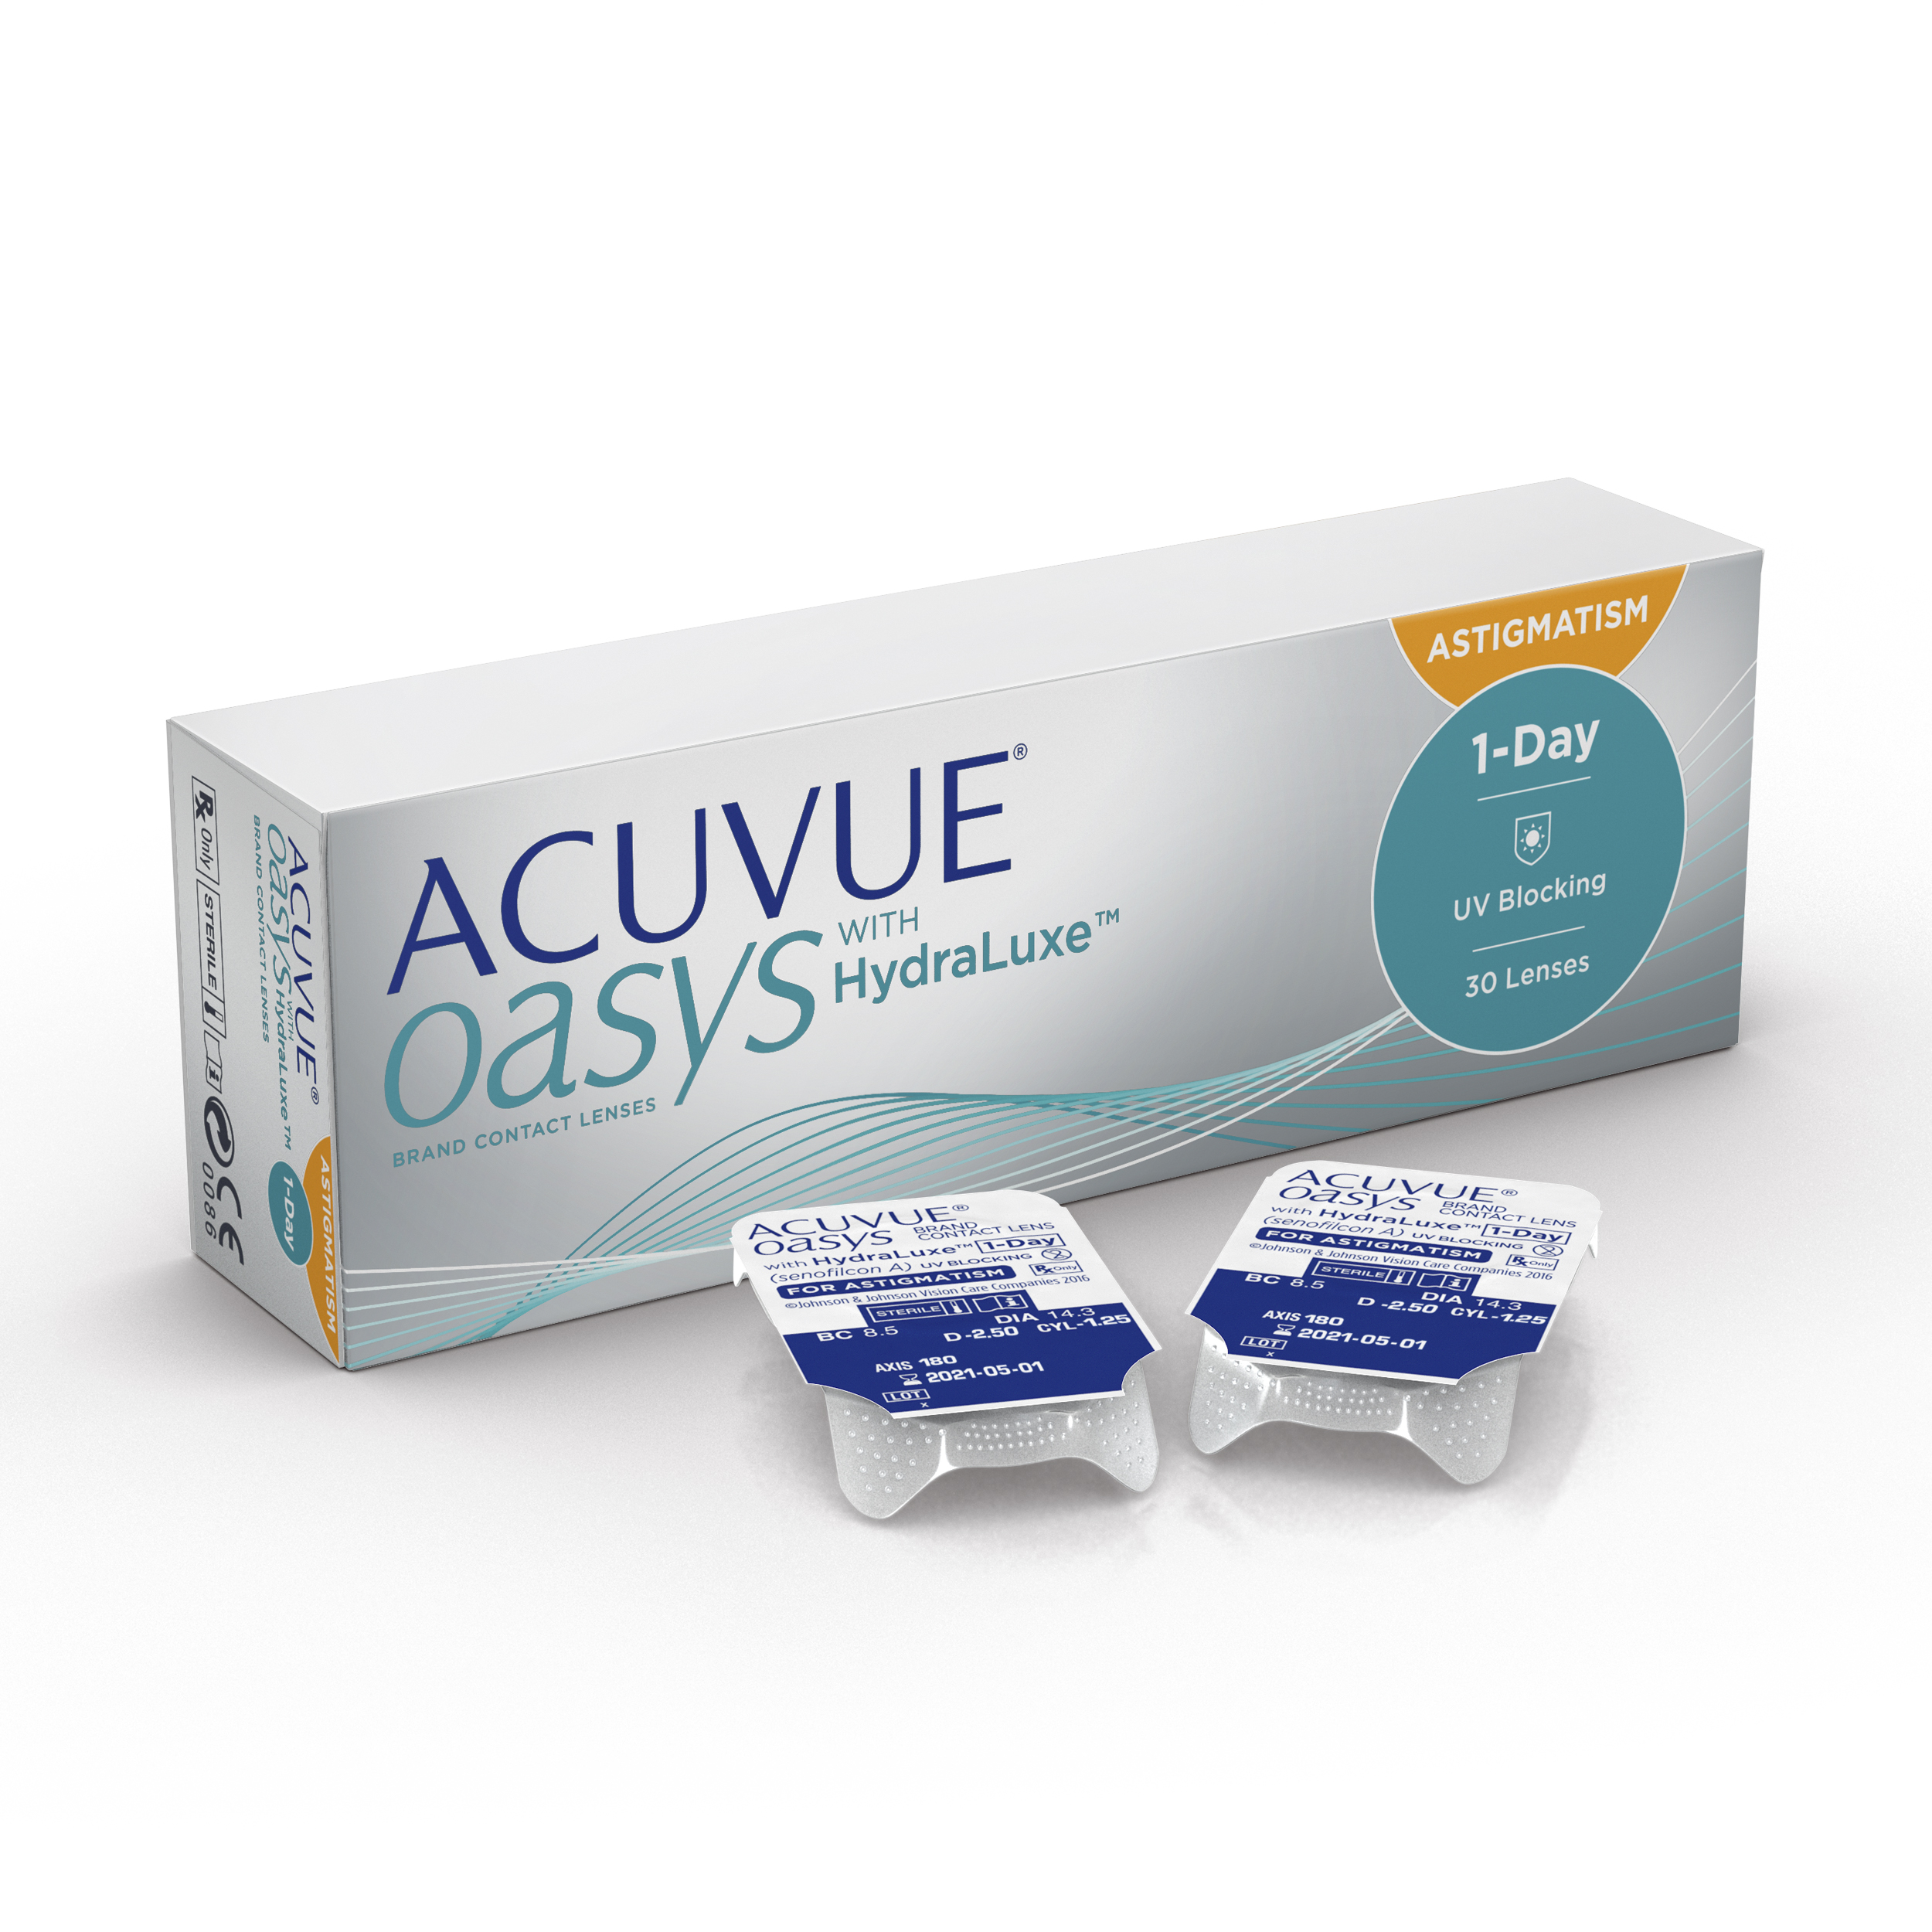 1 day acuvue lenses